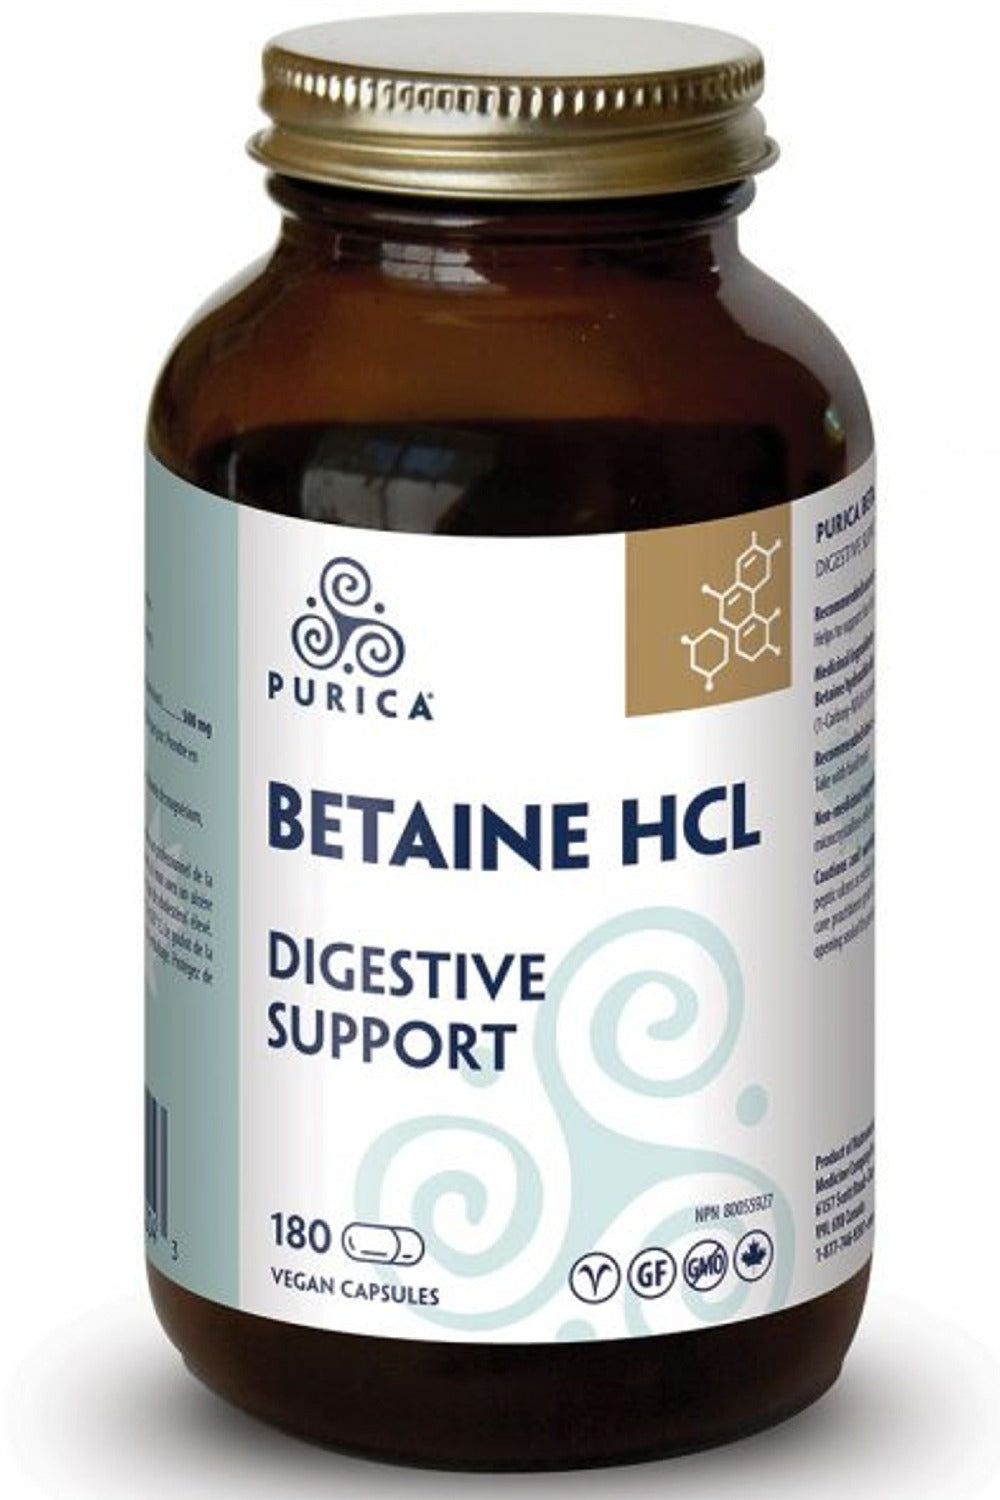 PURICA Betaine HCL (180 v-caps)